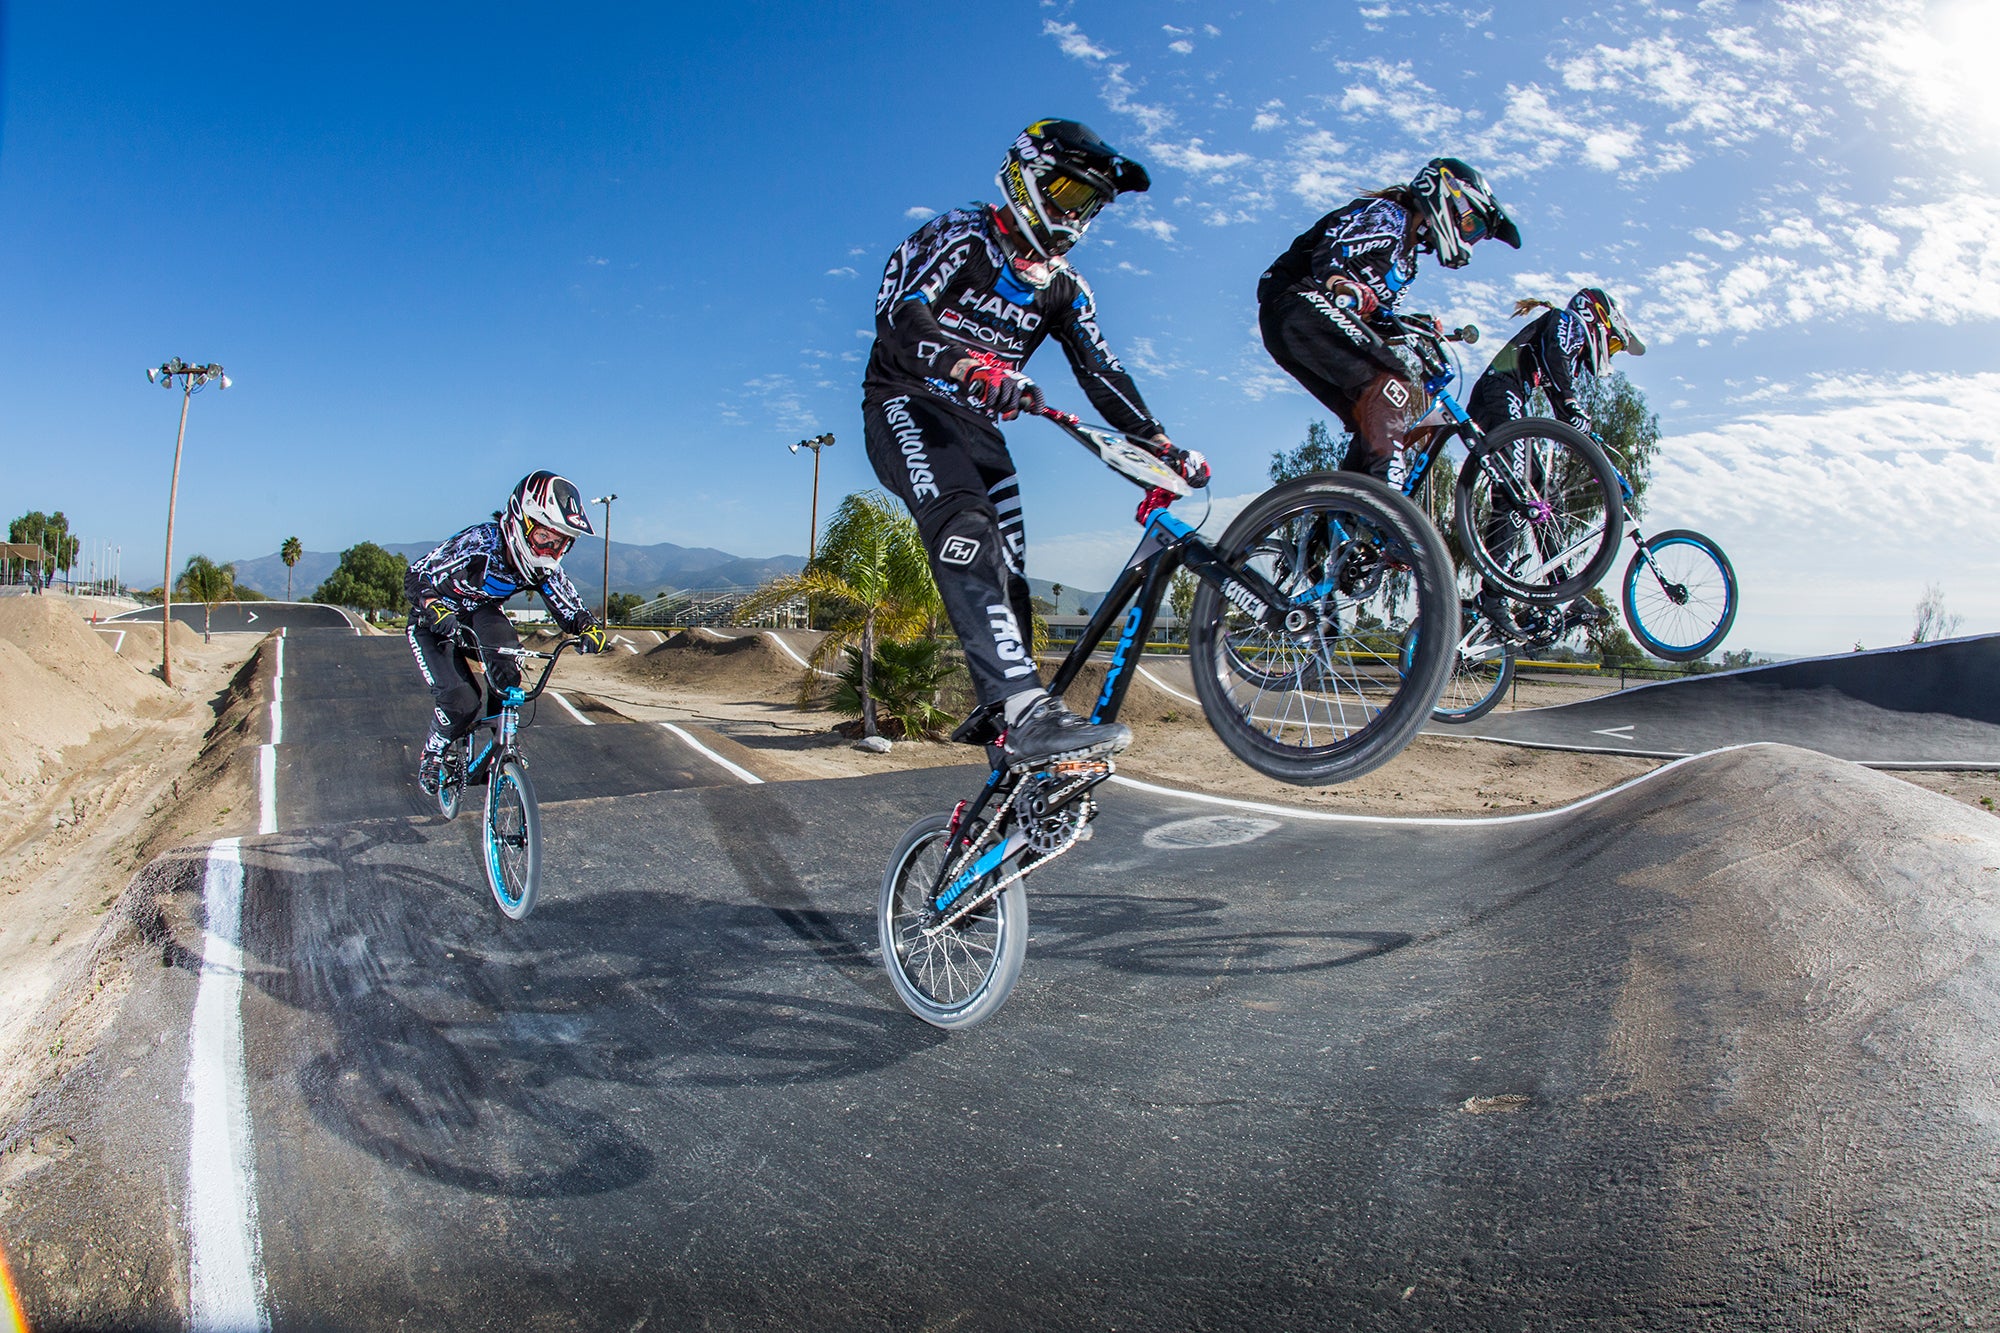 BMX Racers on the track